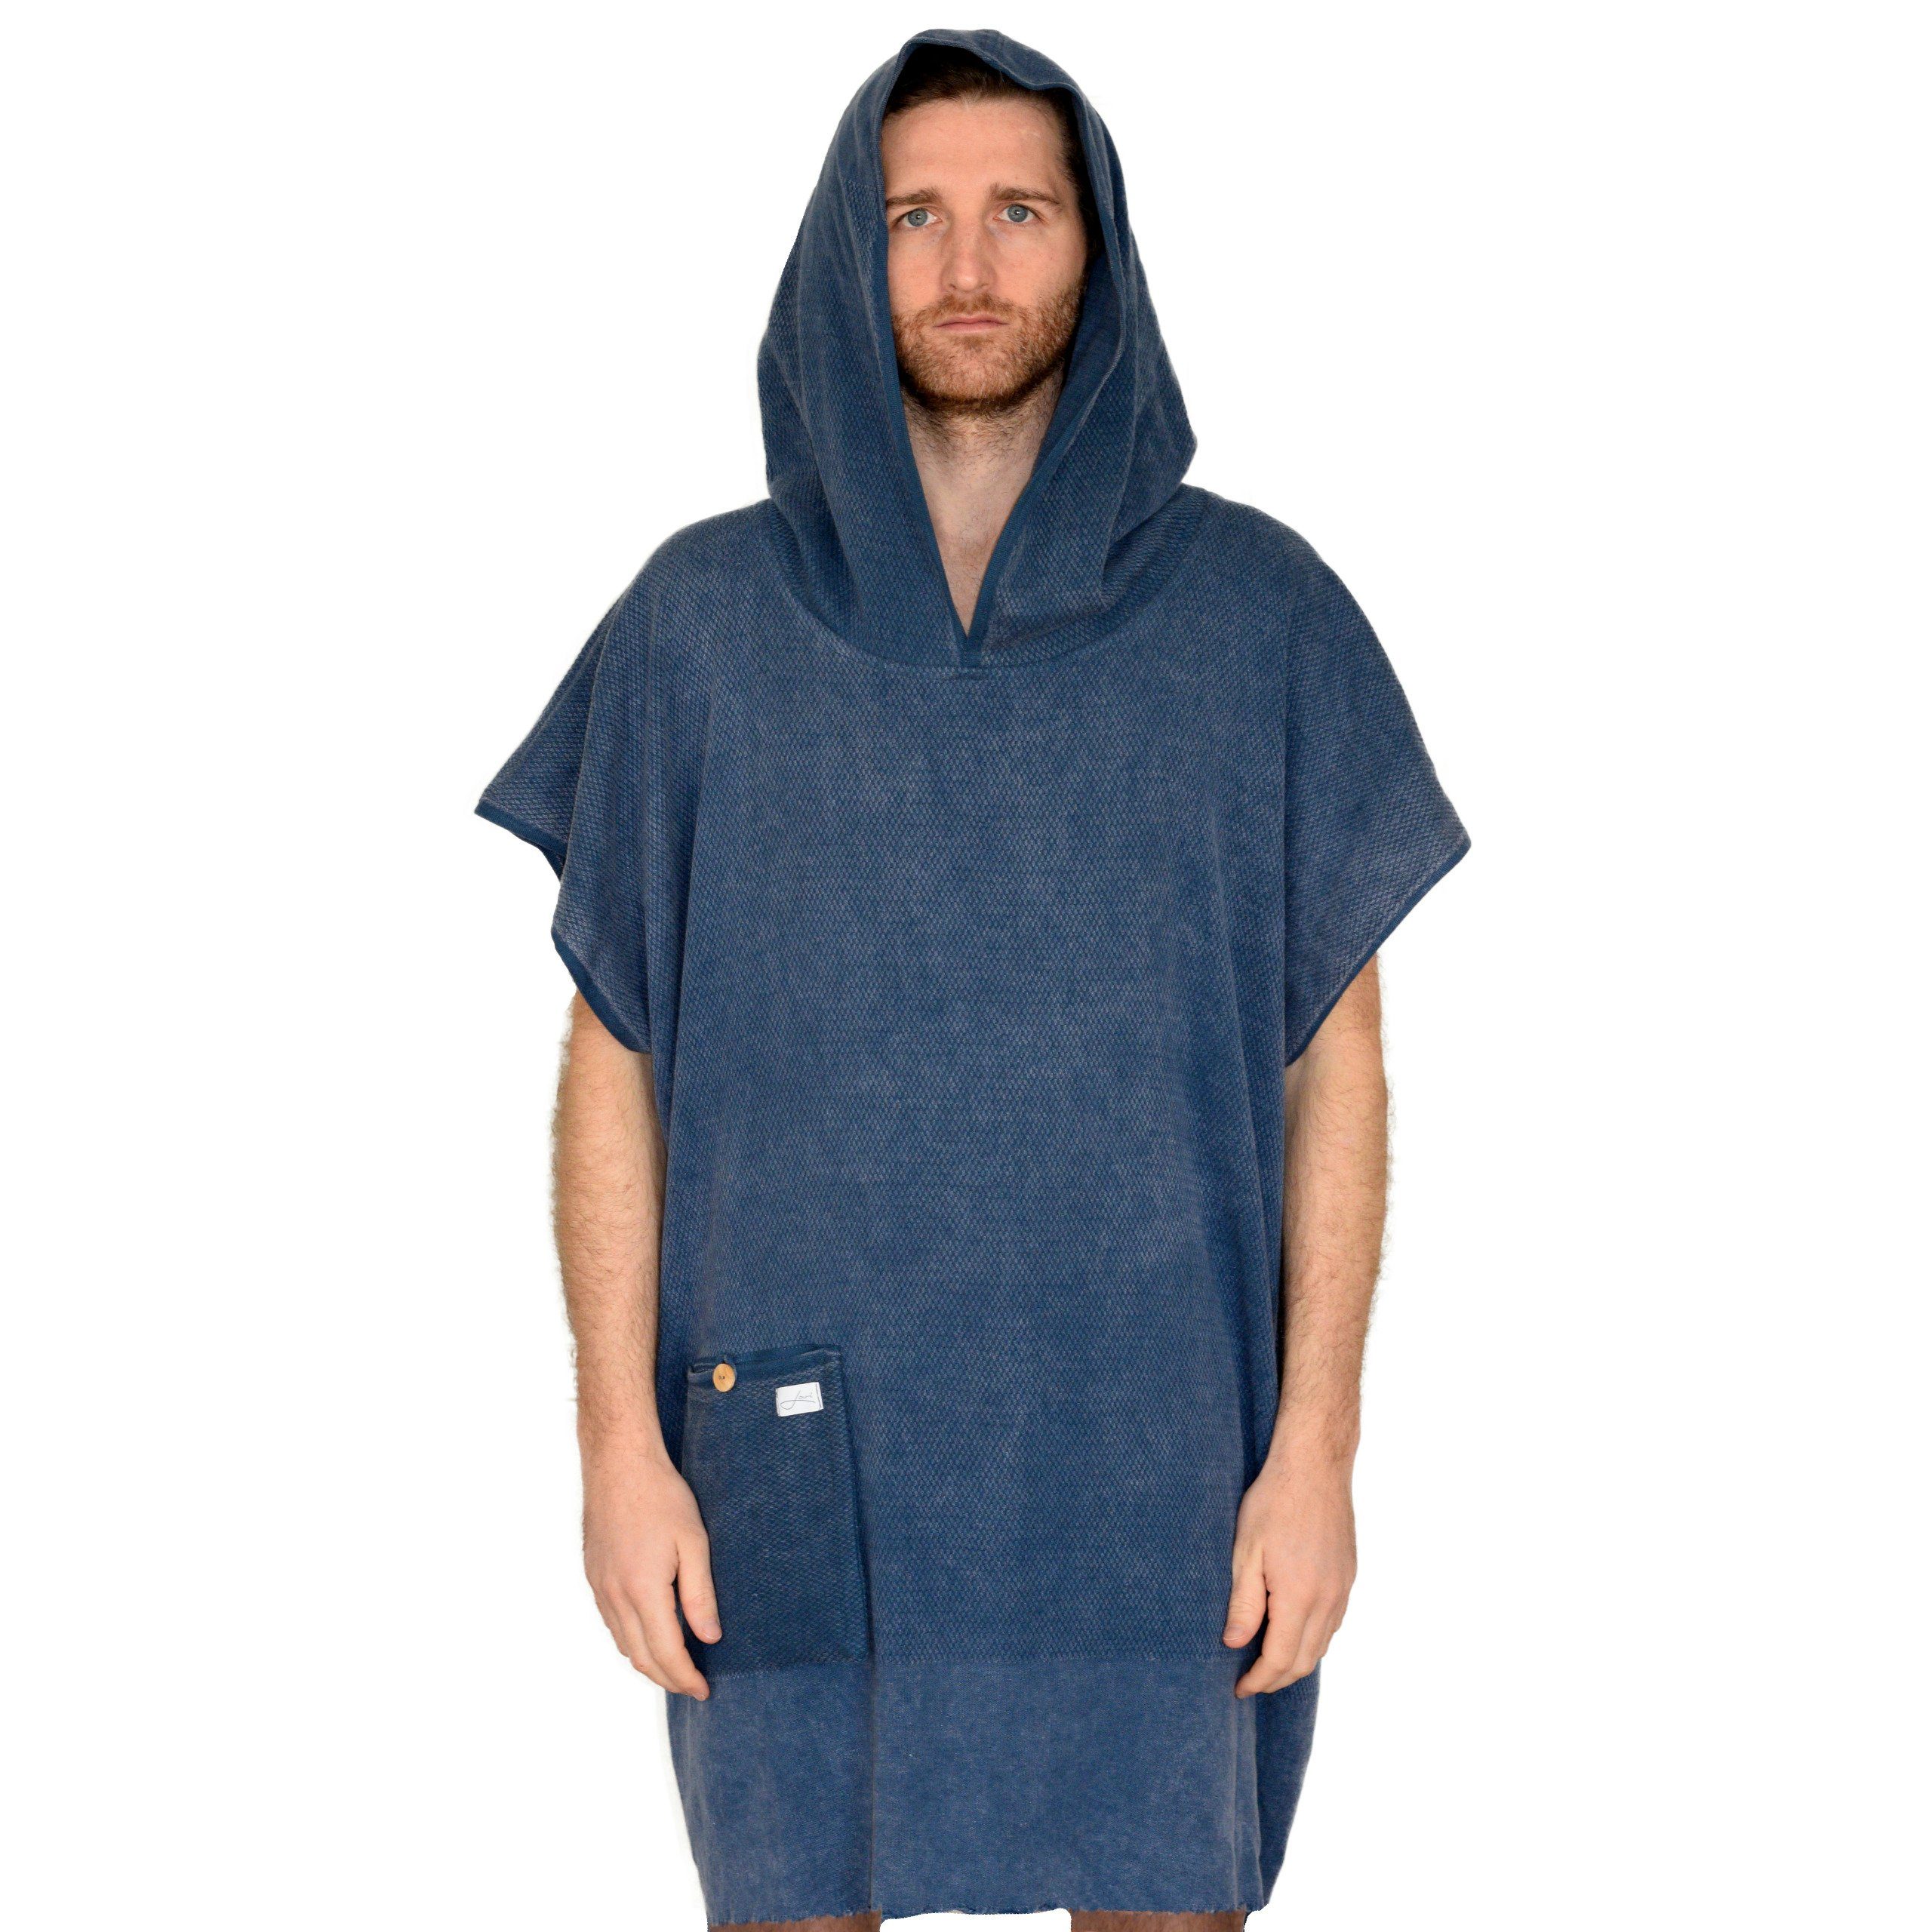 Lou-i Badeponcho Badeponcho Made in Germany Surfponcho (leicht & schnell trocken), Kapuze blau